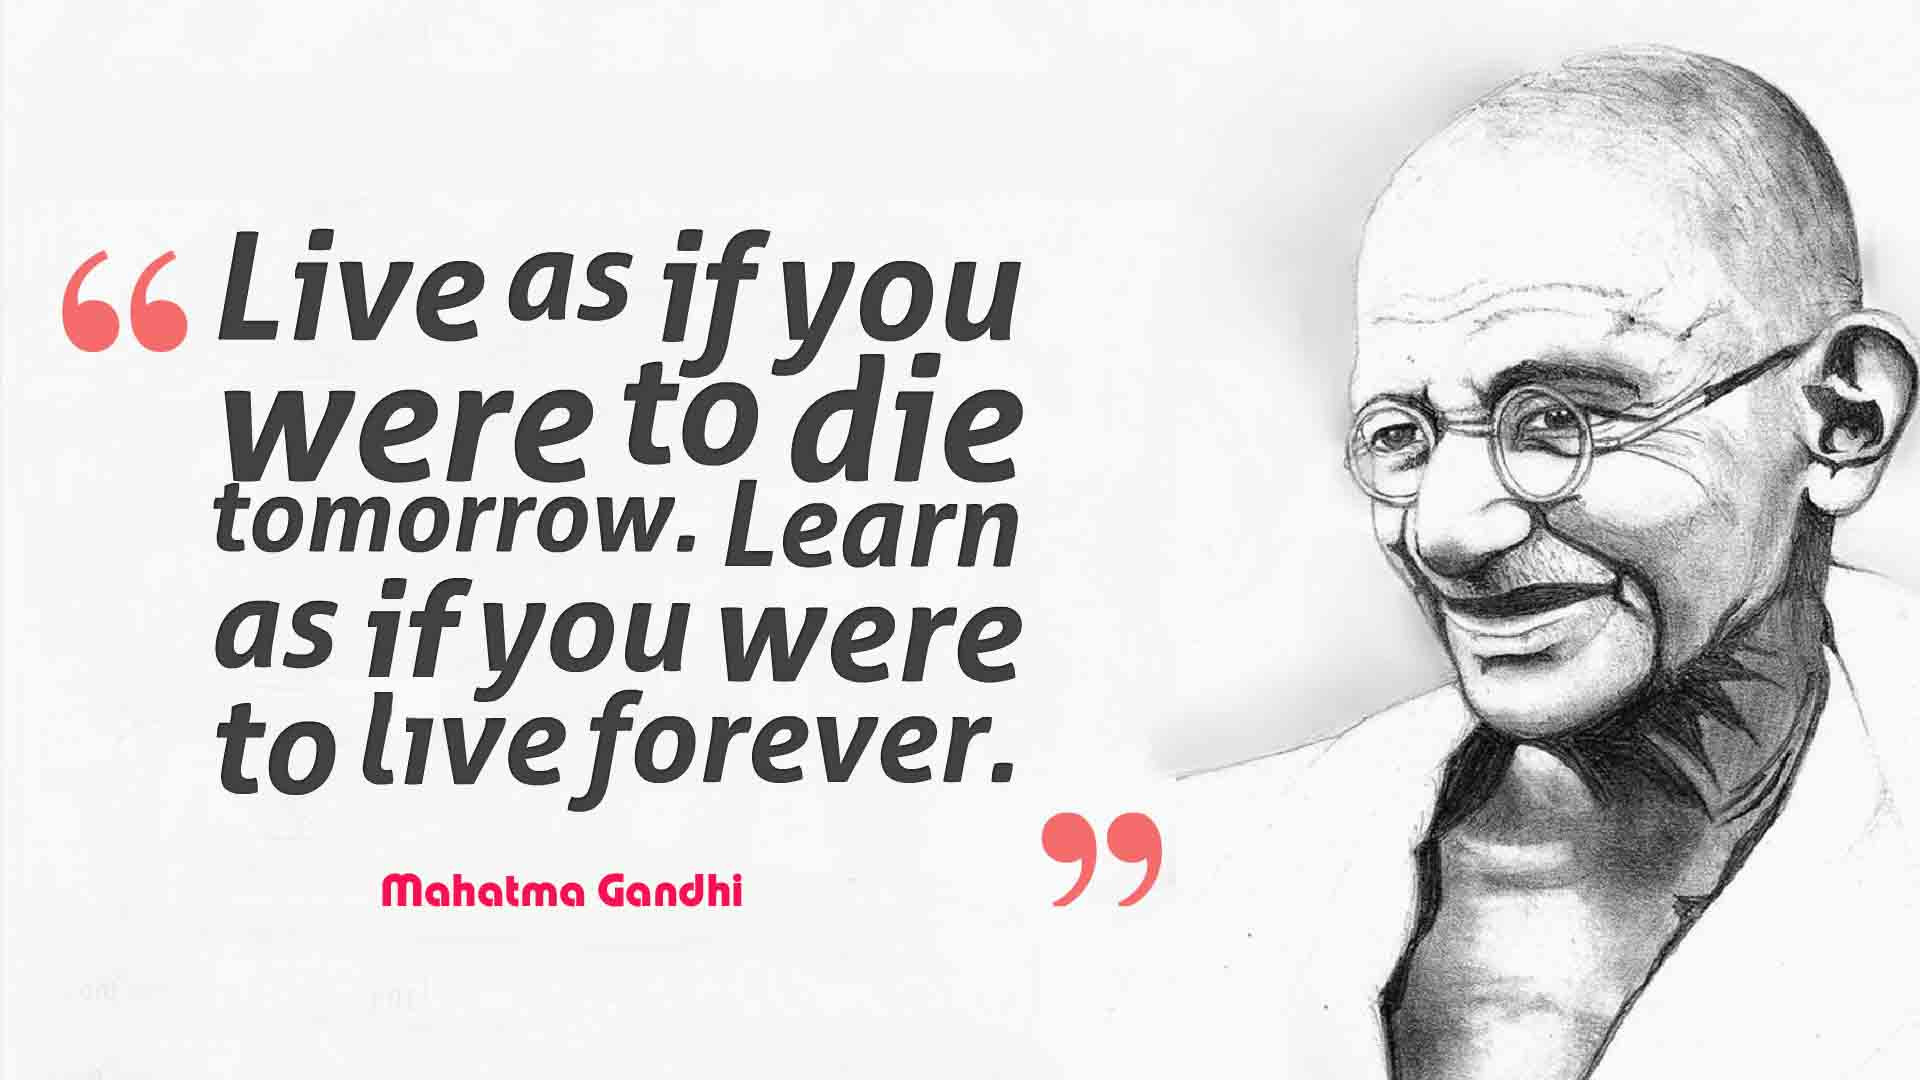 Gandhi Quote About Life
 Lessons To Learn From The Life Mahatma Gandhi